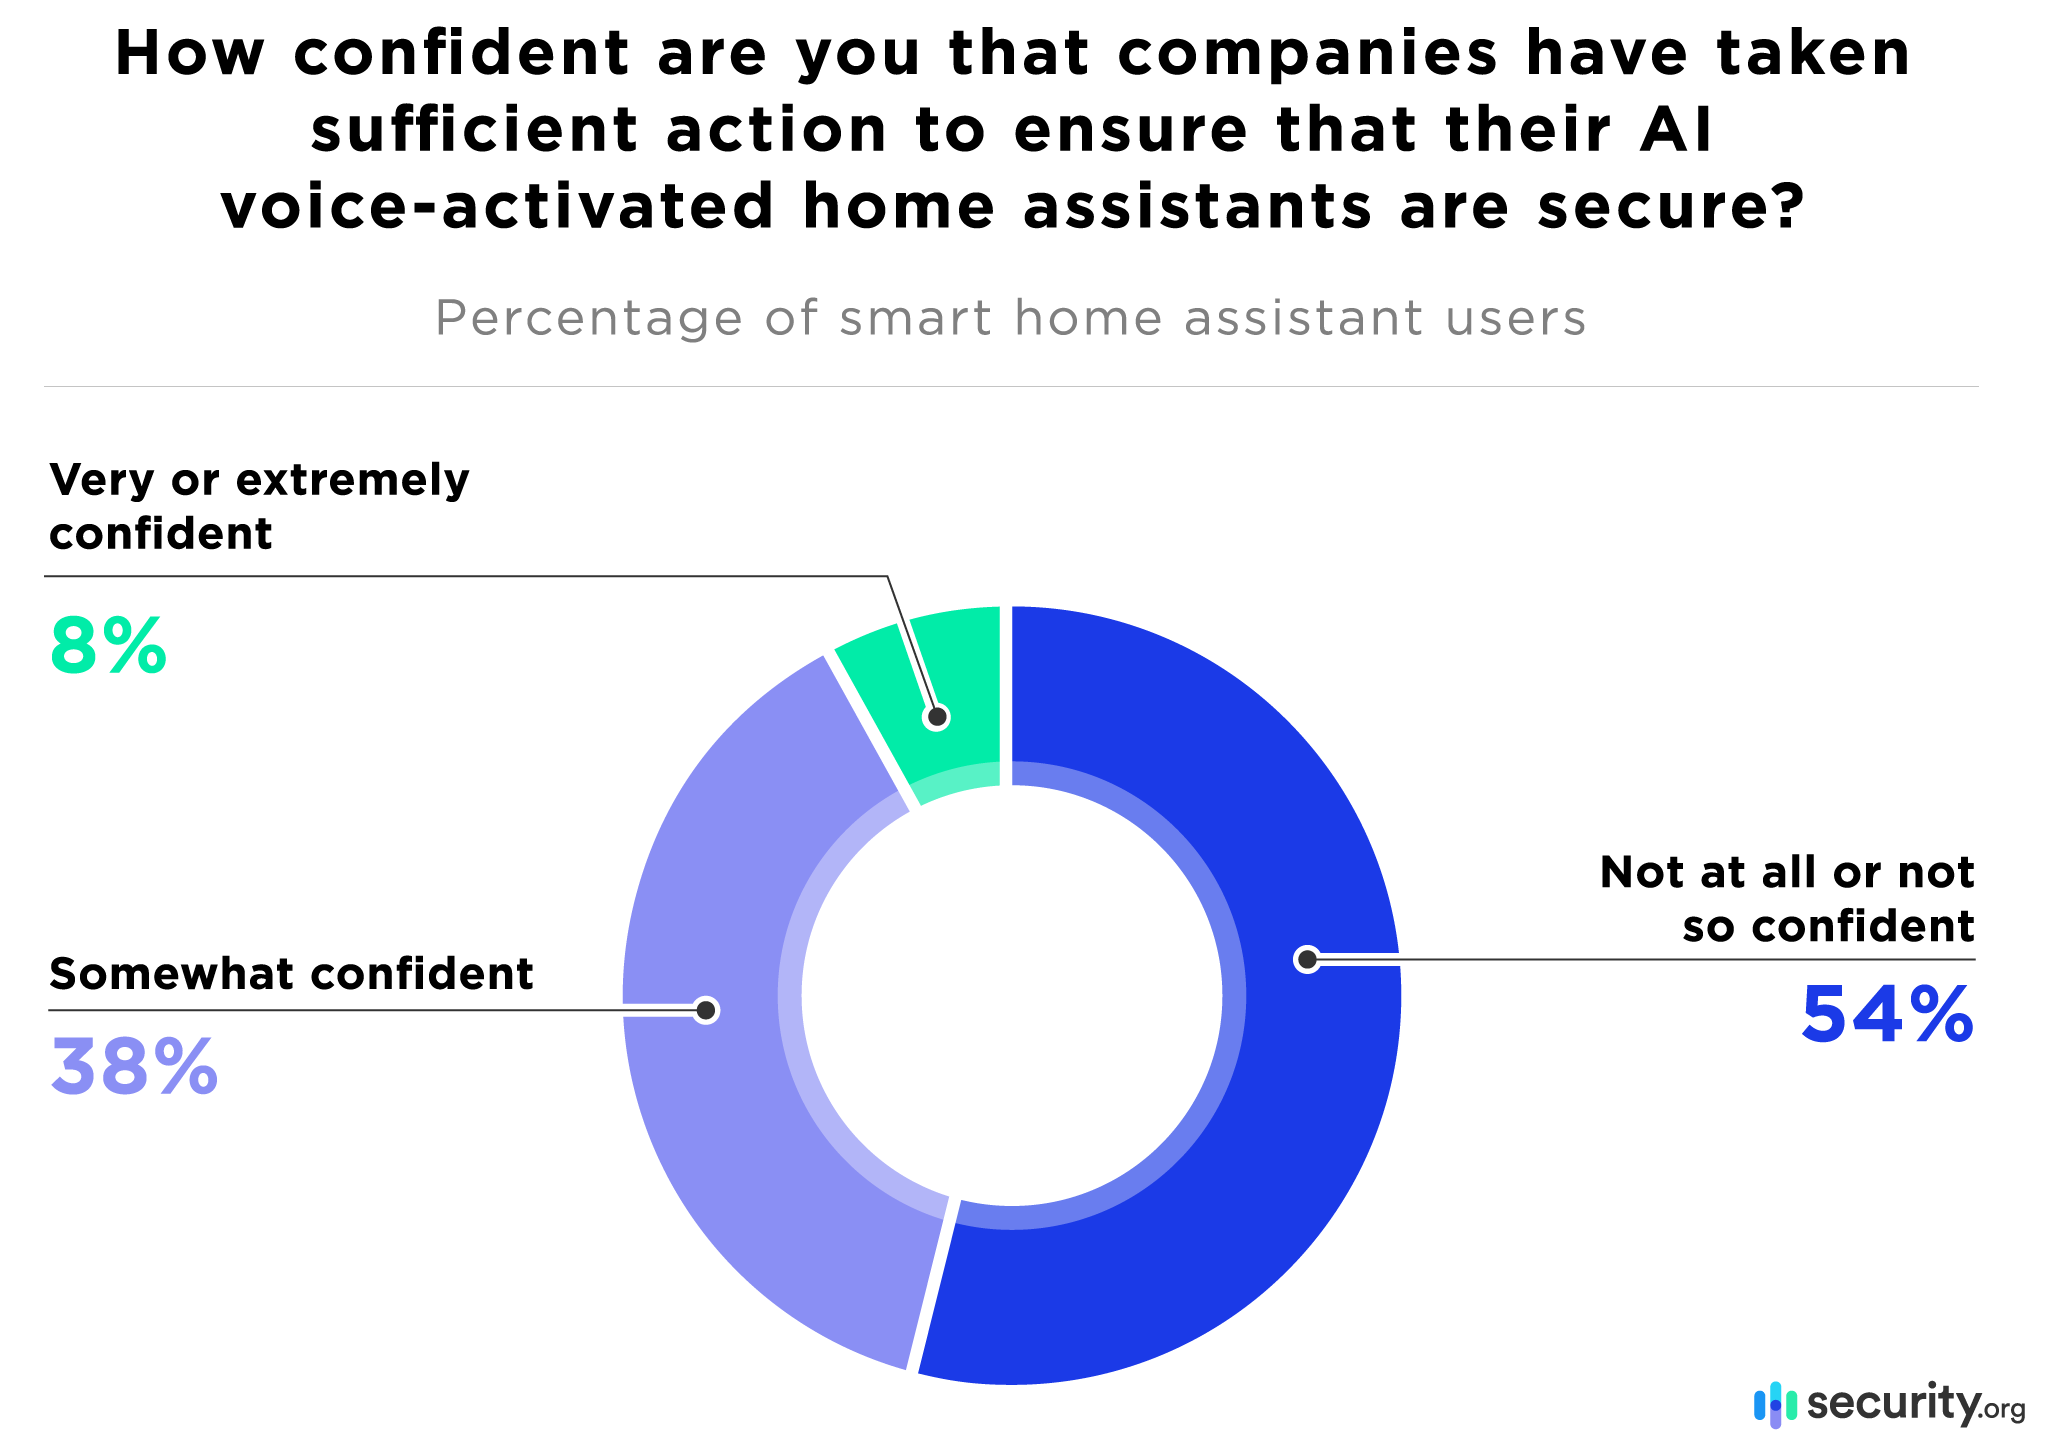 How confident are you that companies have taken sufficient action to ensure that their AI voice-activated home assistants are secure